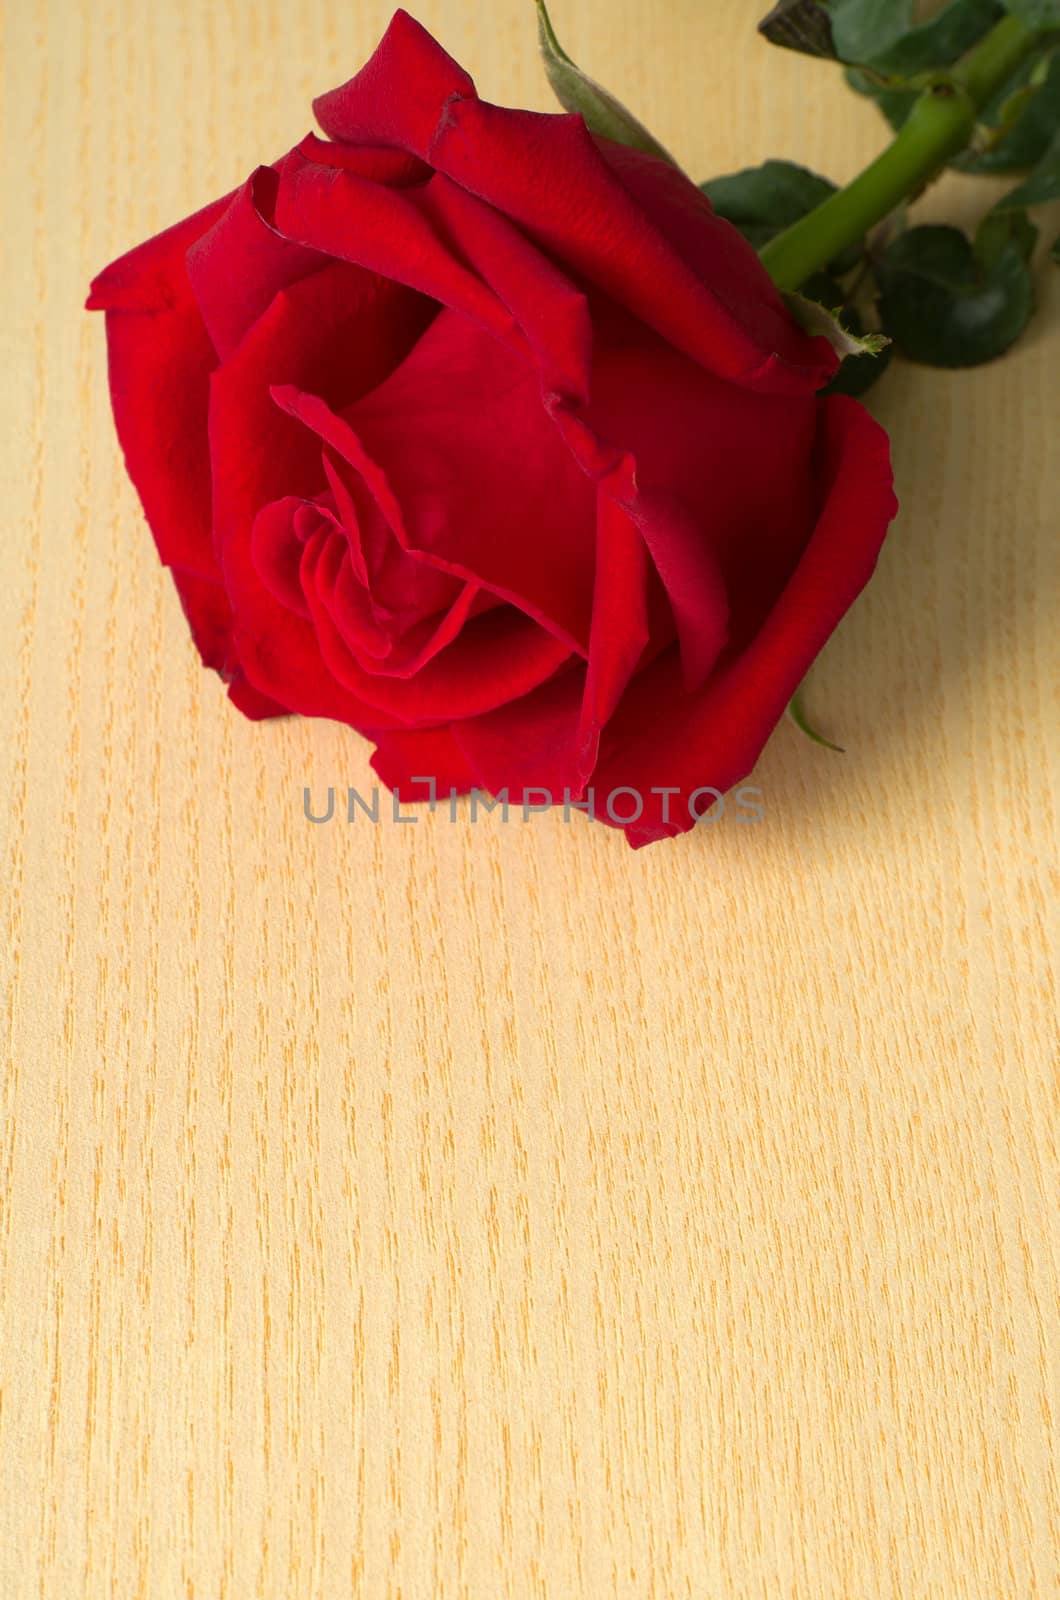 Red rose at top on wood by nuttakit